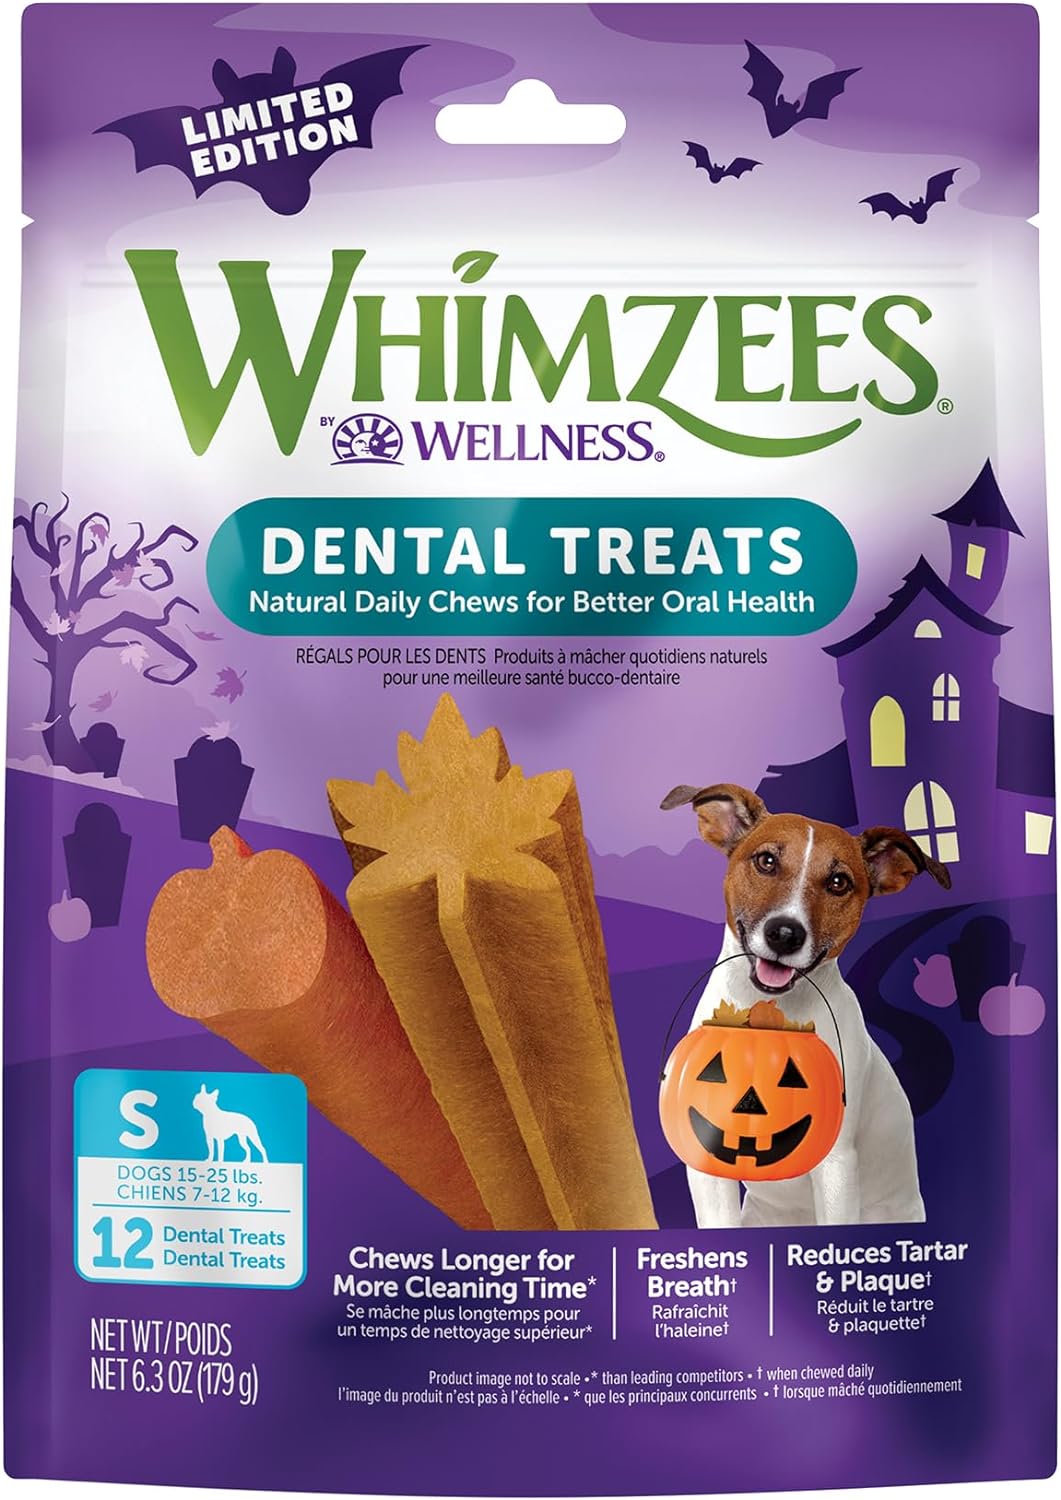 Whimzees by Wellness Halloween Natural Dental Chews for Dogs, Long Lasting Treats, Grain-Free, Freshens Breath, Small Breed, 12 Count